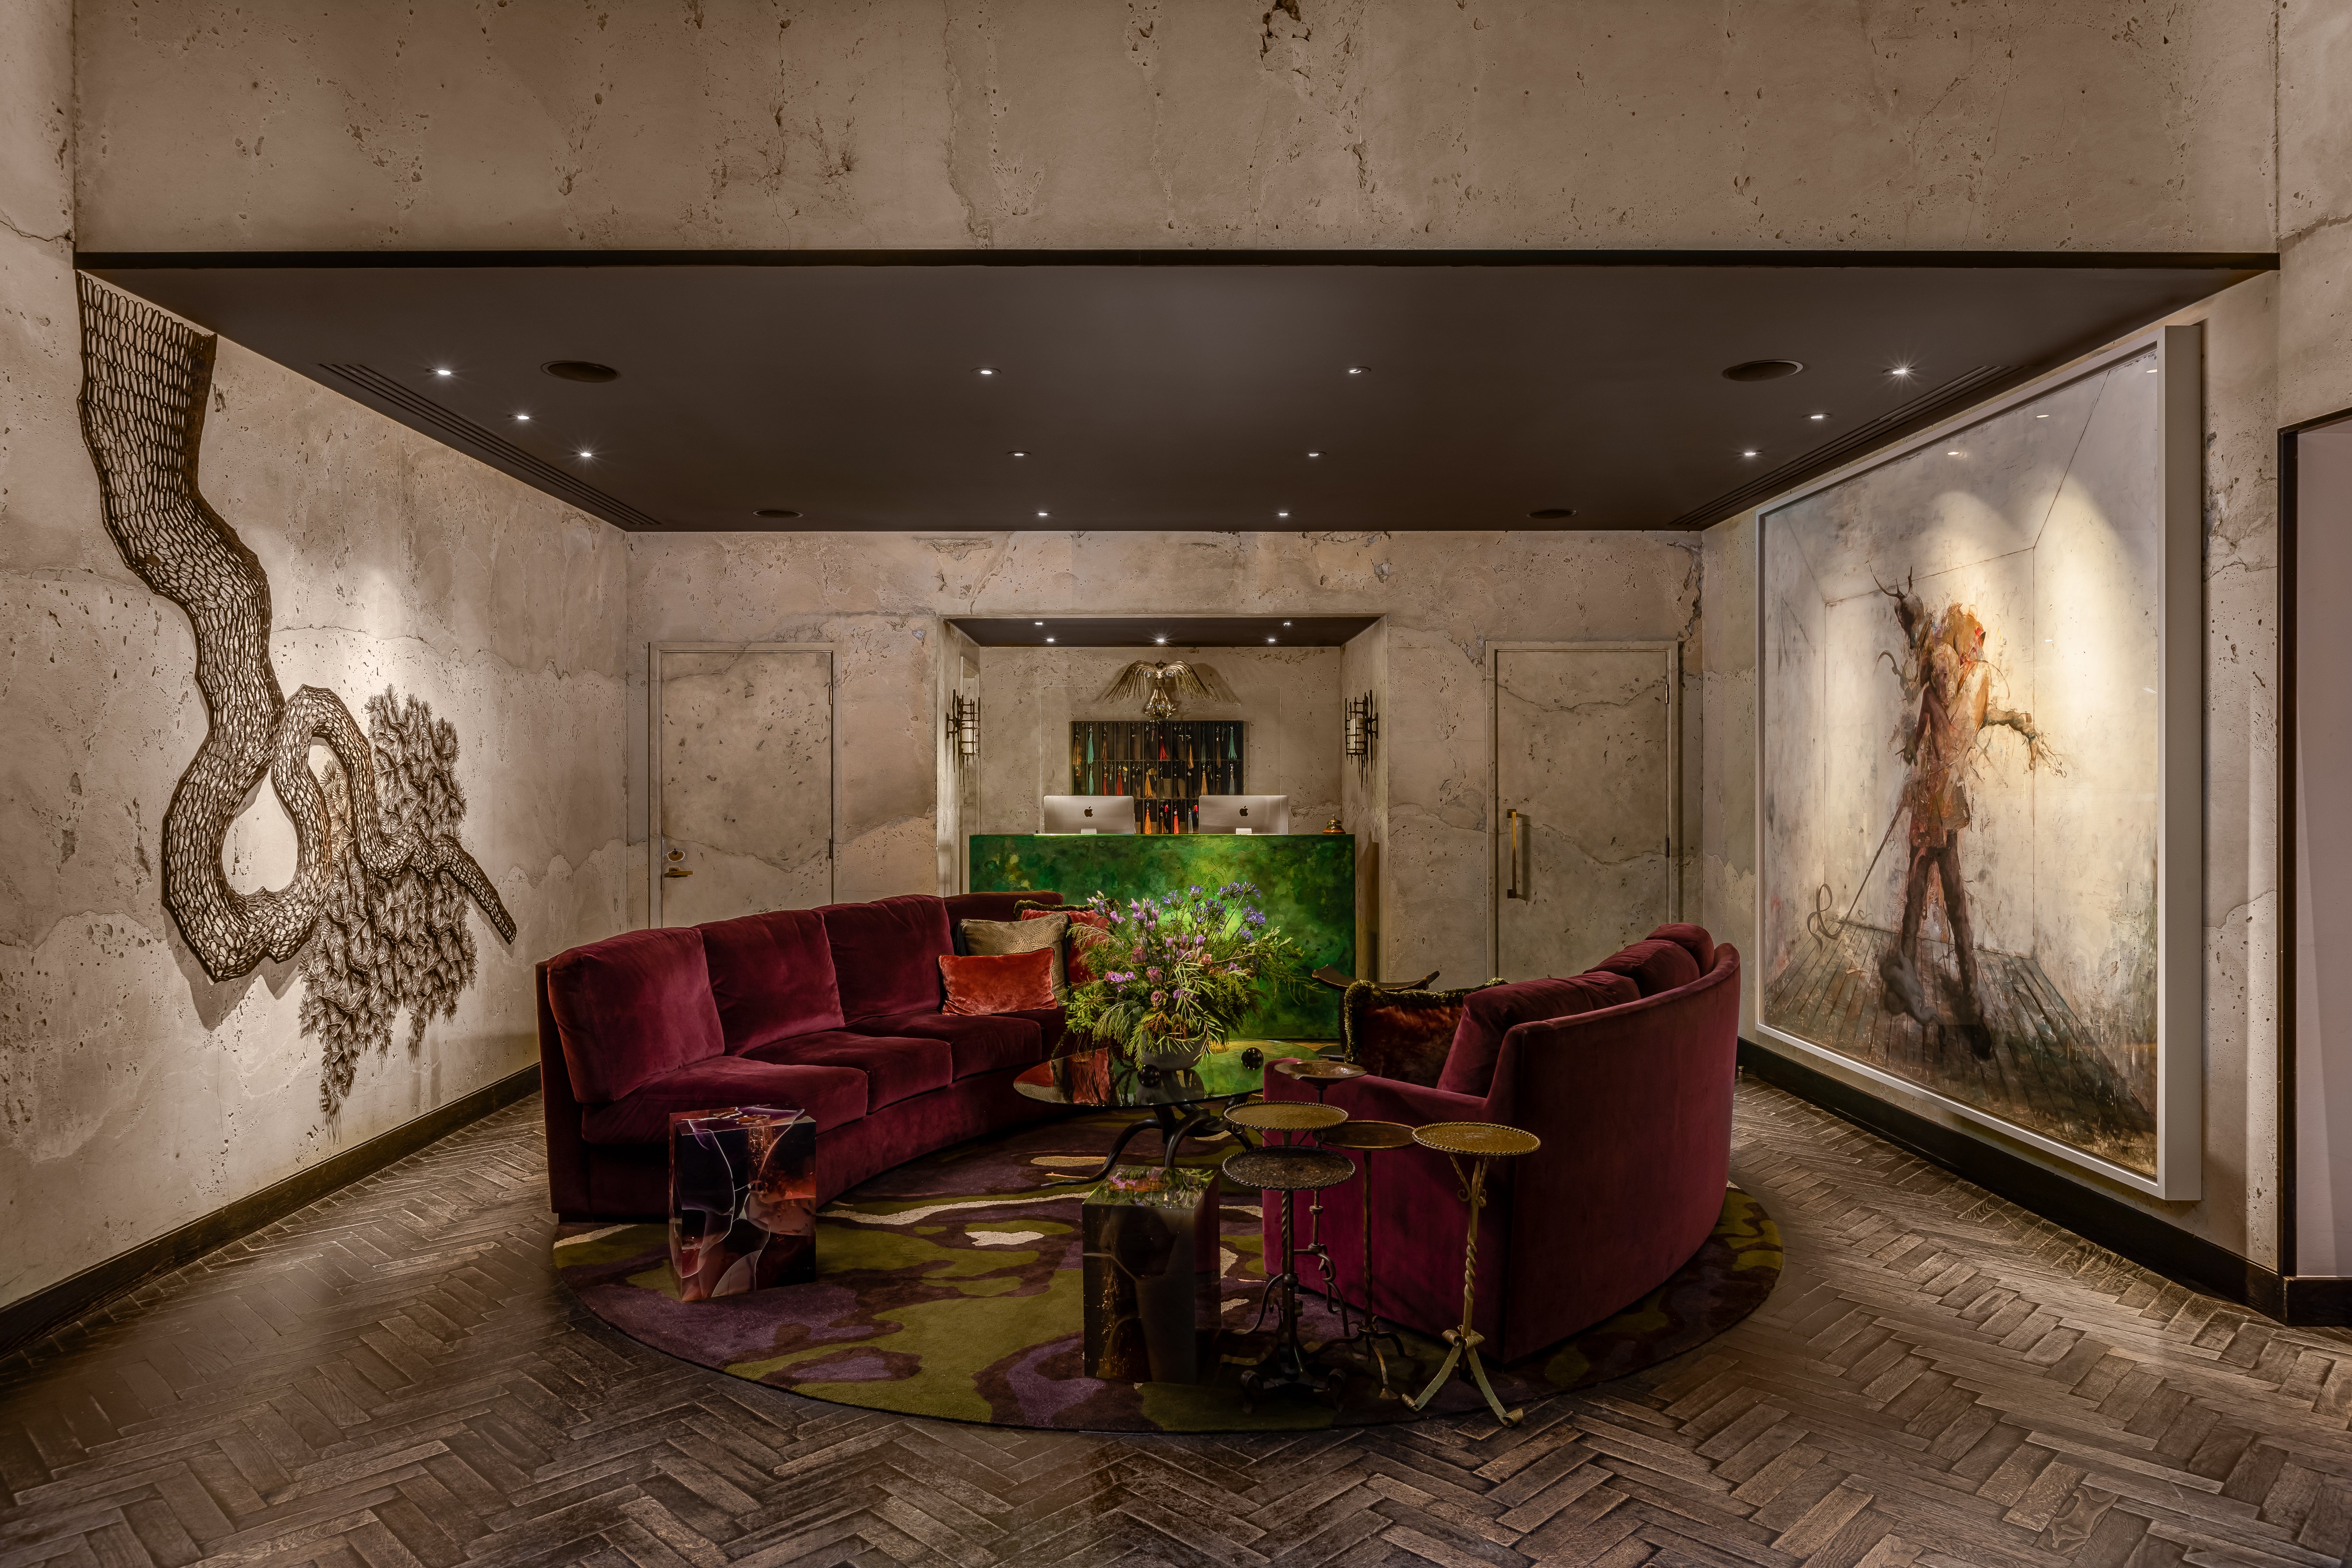 Walk the mesmerising spaces of the five-star Fitzrovian Hotel